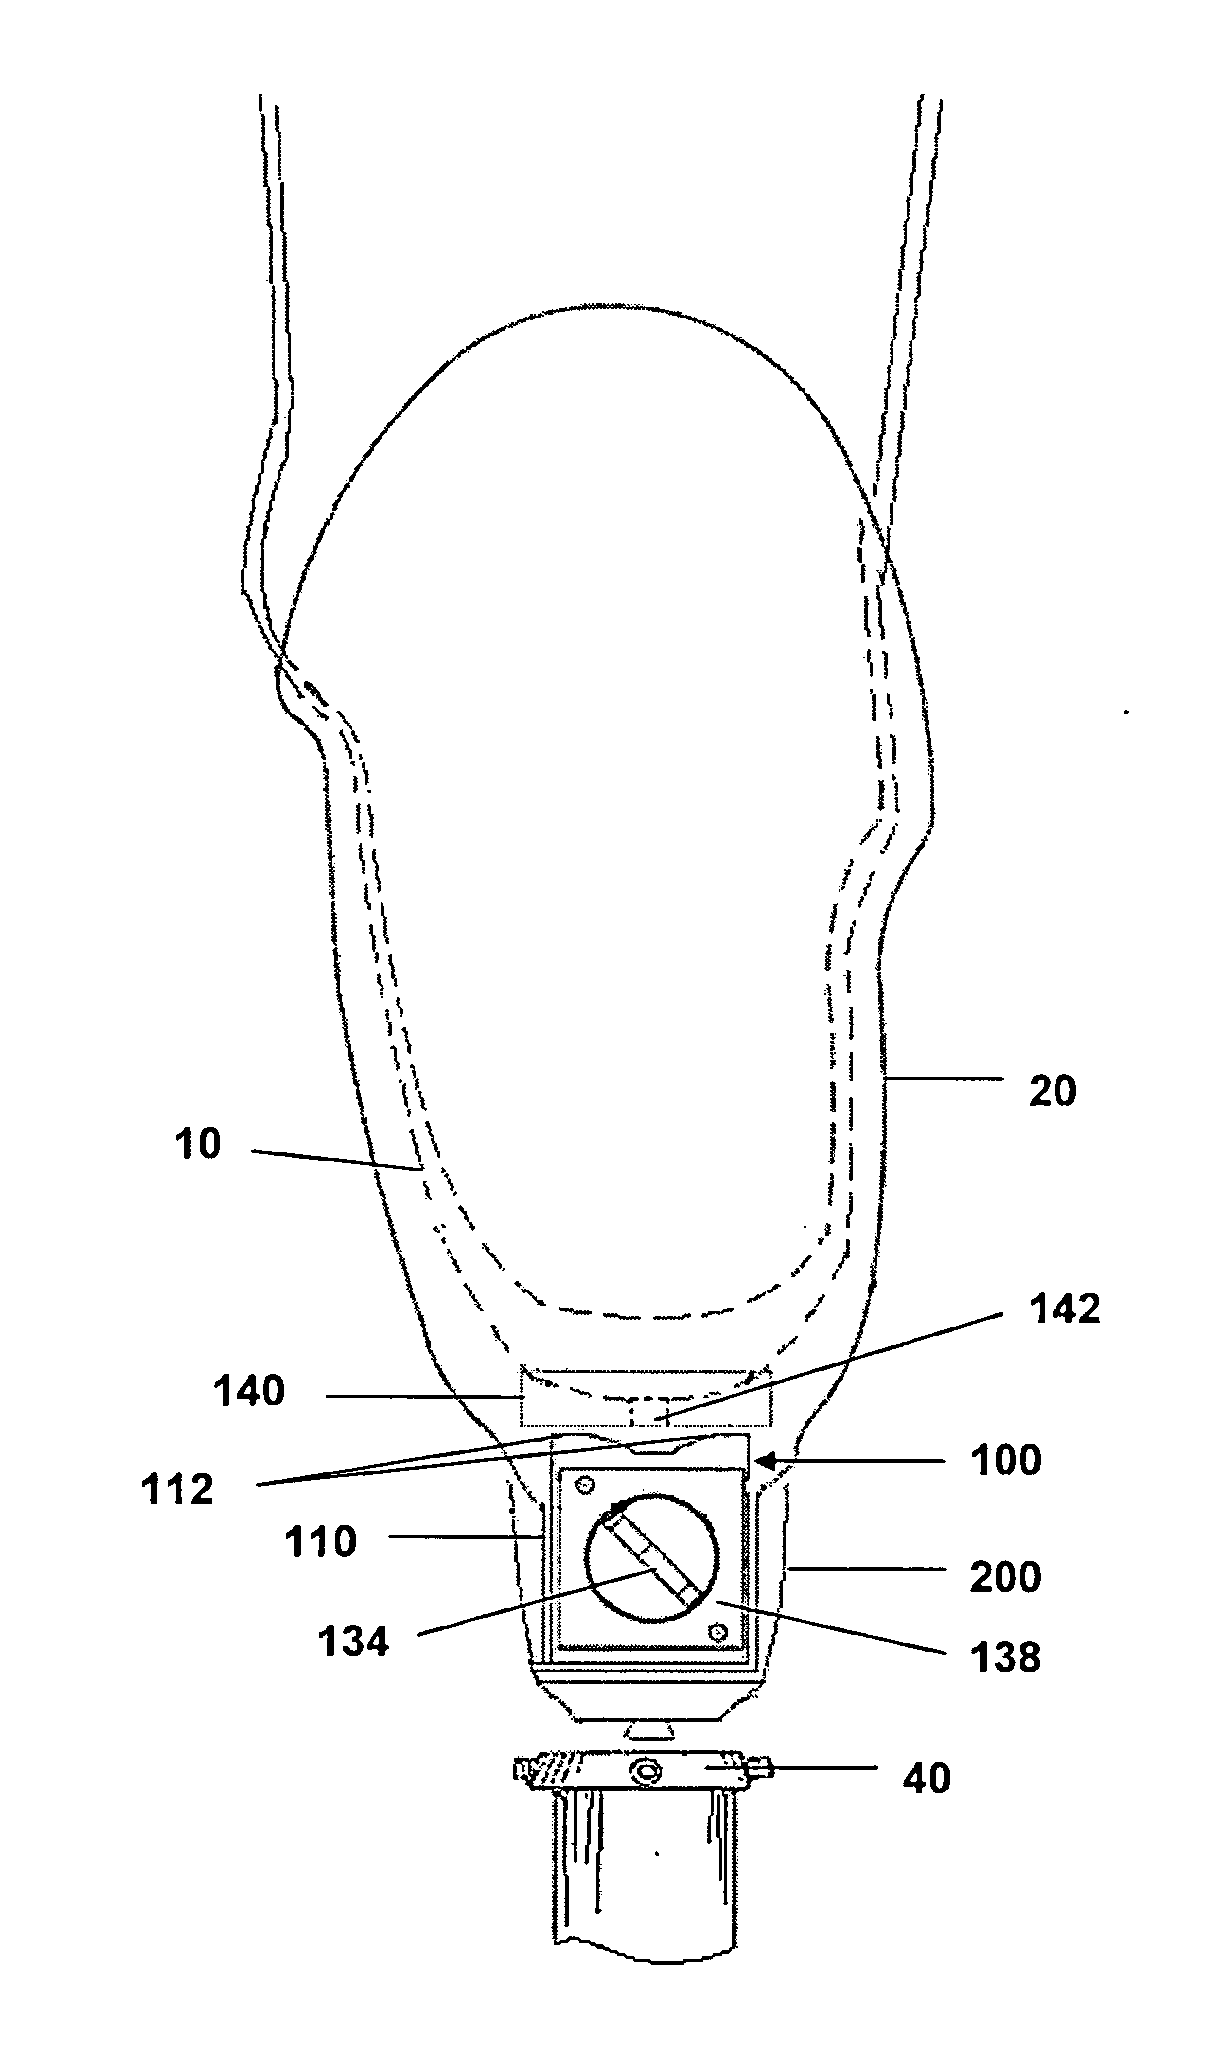 Magnetic Coupling Device of a Limb Prosthesis